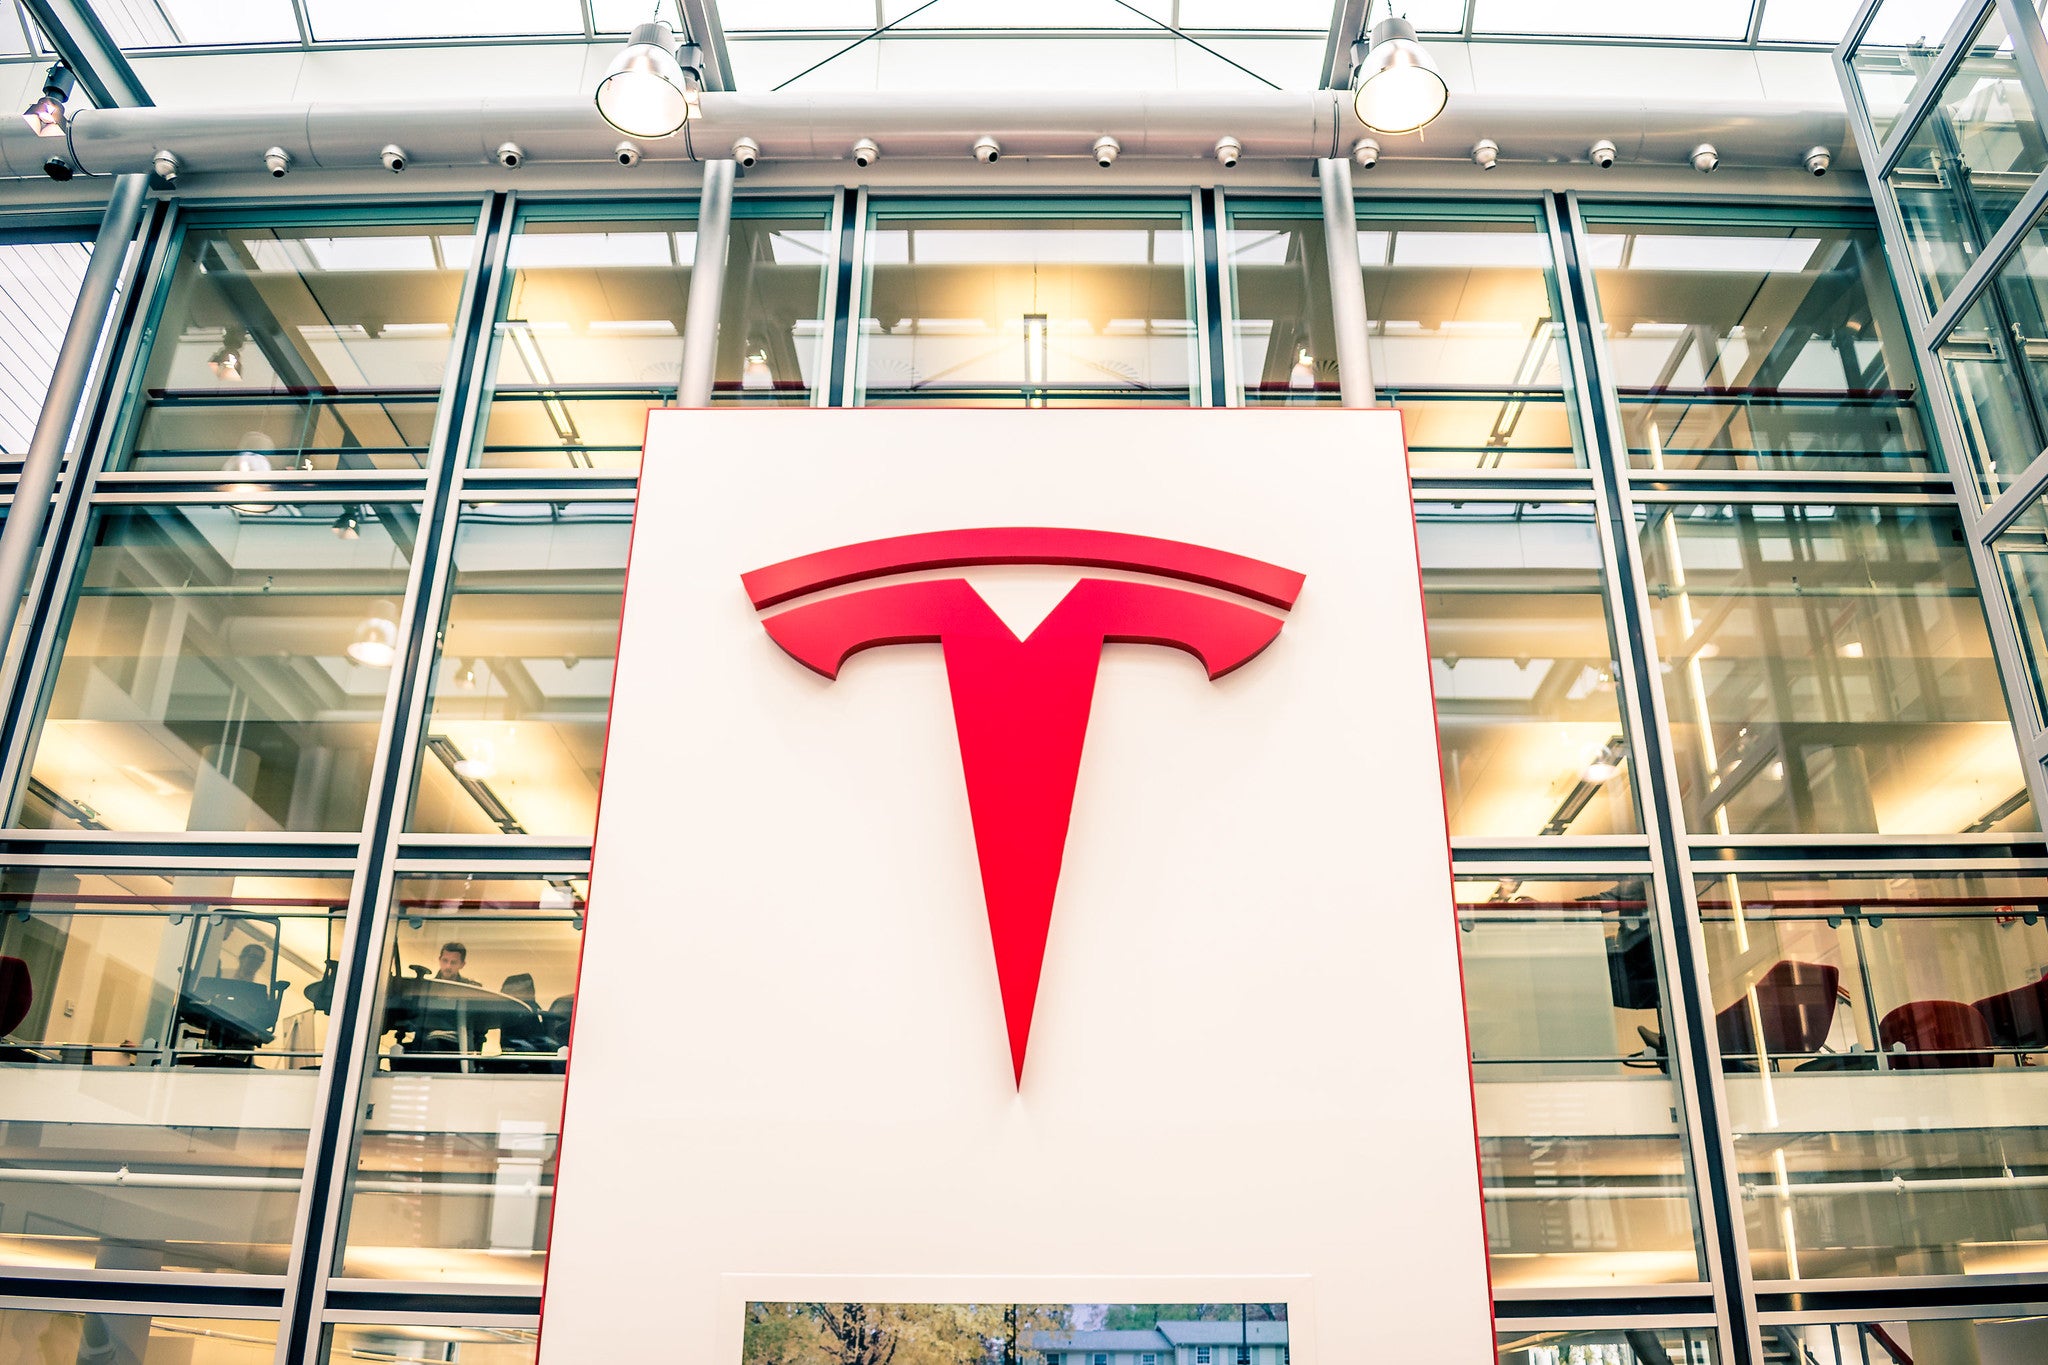 Tesla (TSLA) Q2 2020 Expectations For The Upcoming Earnings Call